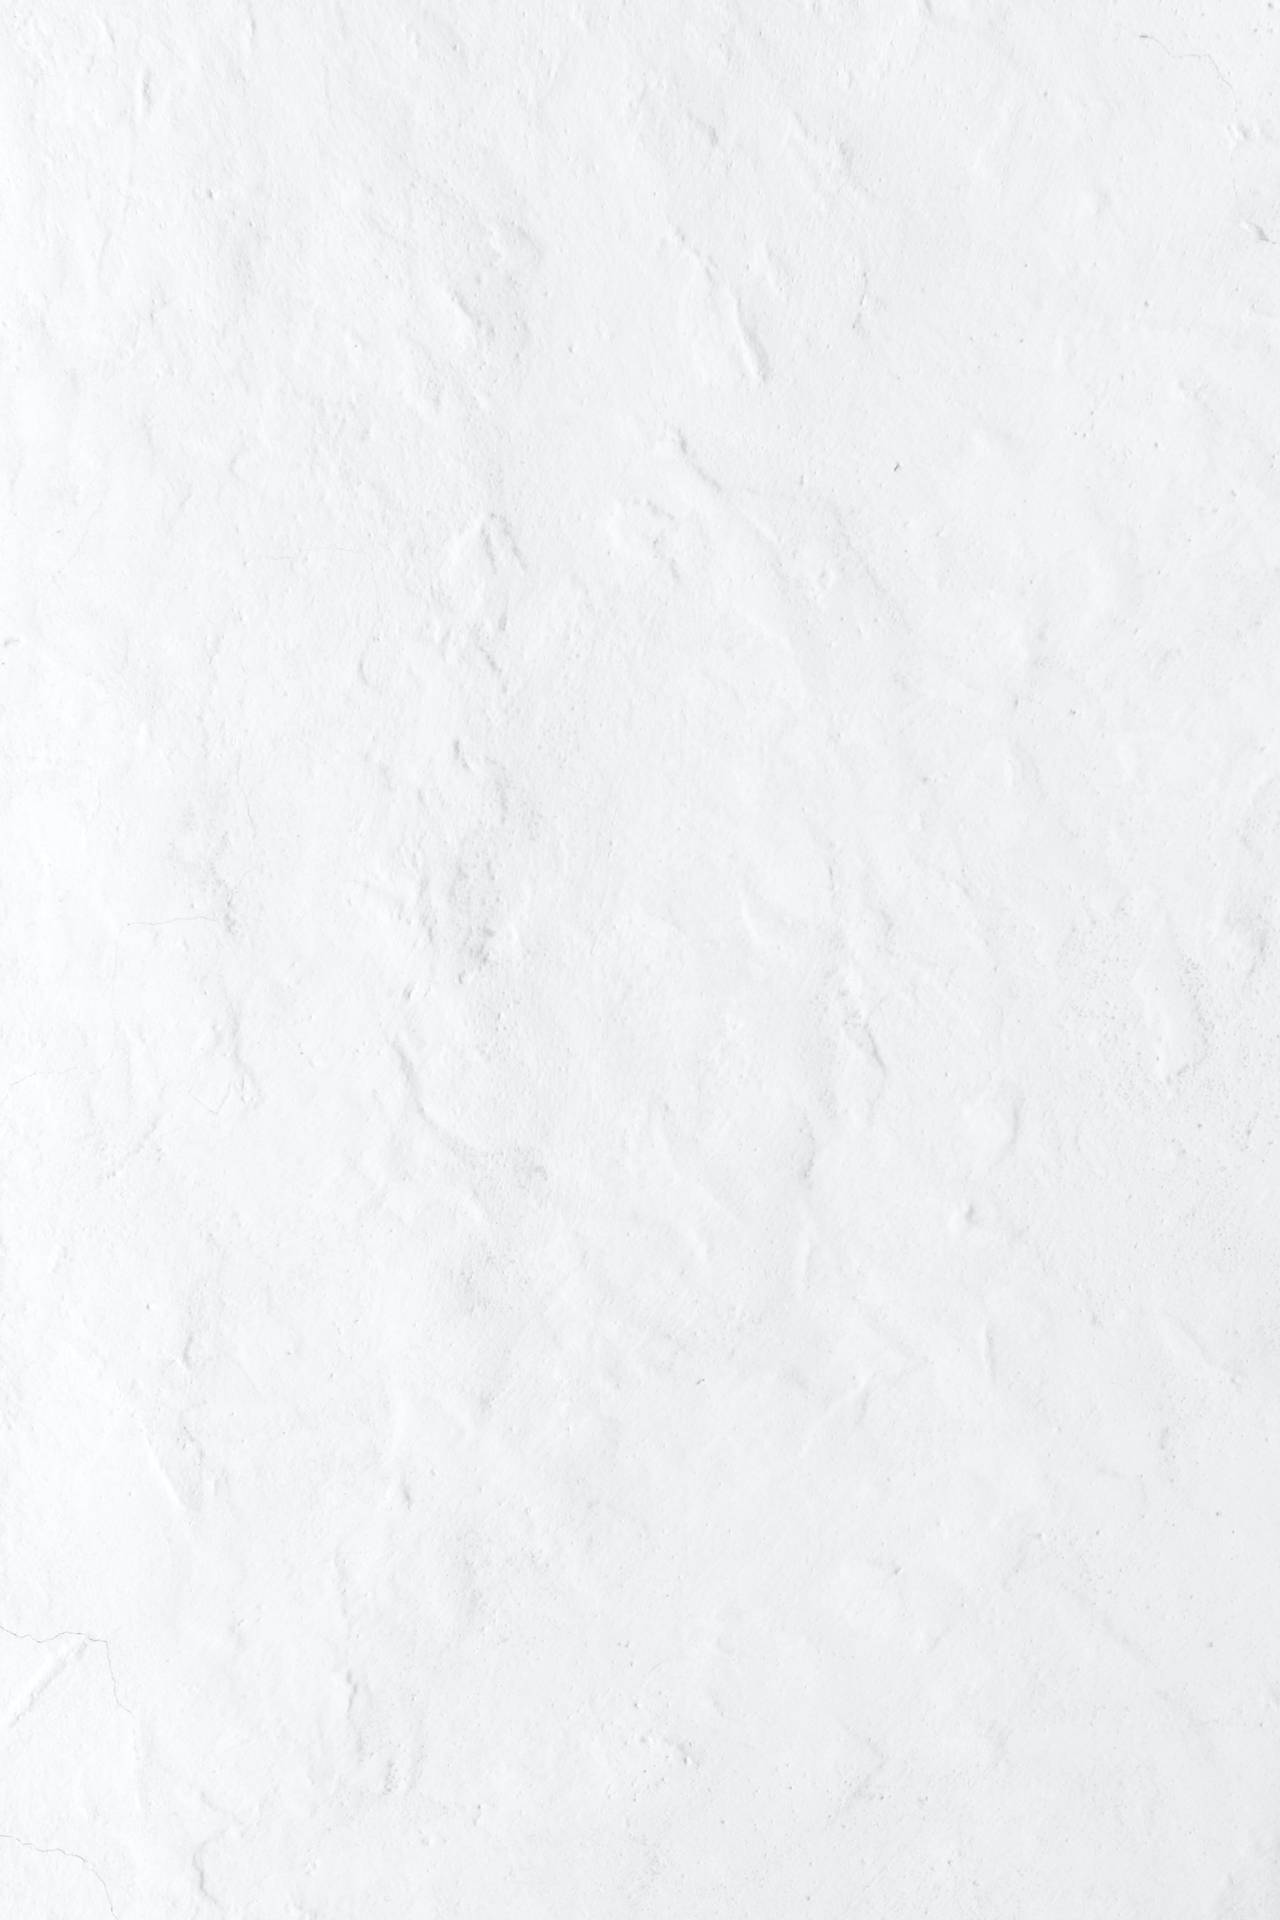 Textured Pure White Wall